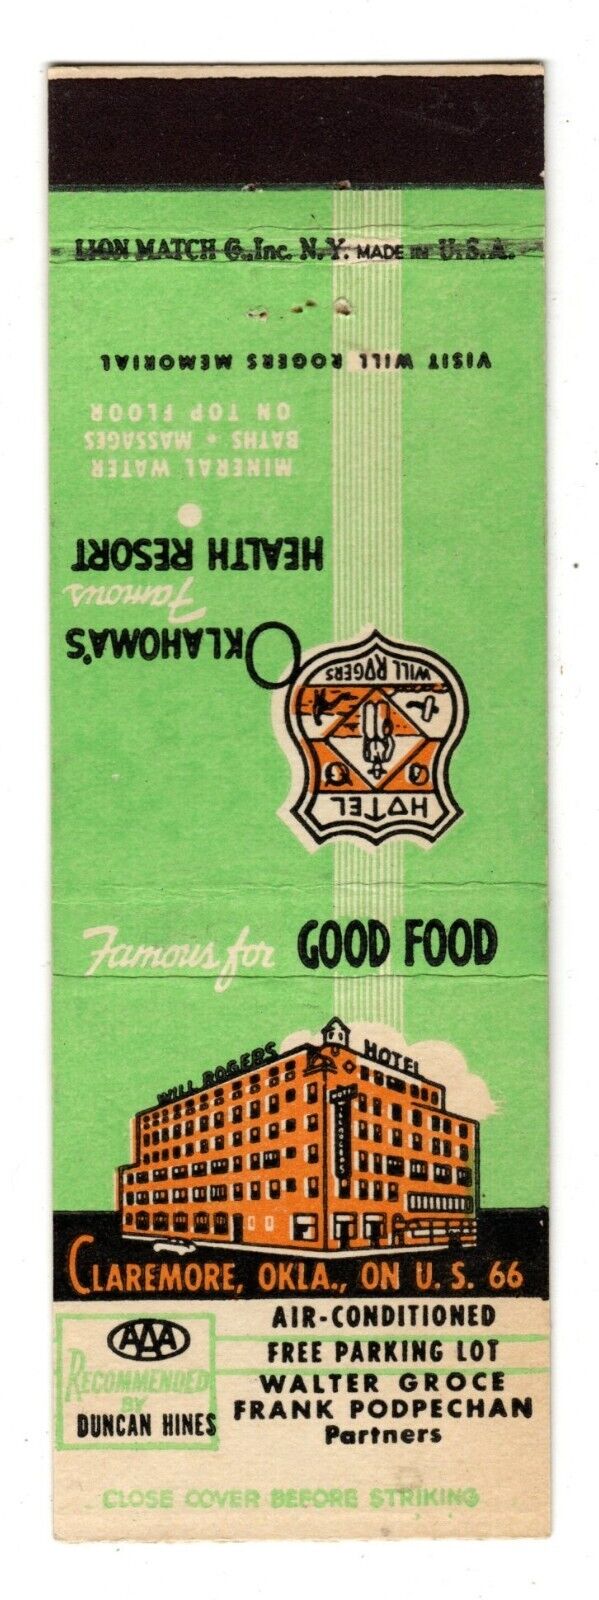 HOTEL WILL ROGERS matchbook matchcover - CLAREMORE, OKLAHOMA - ROUTE 66